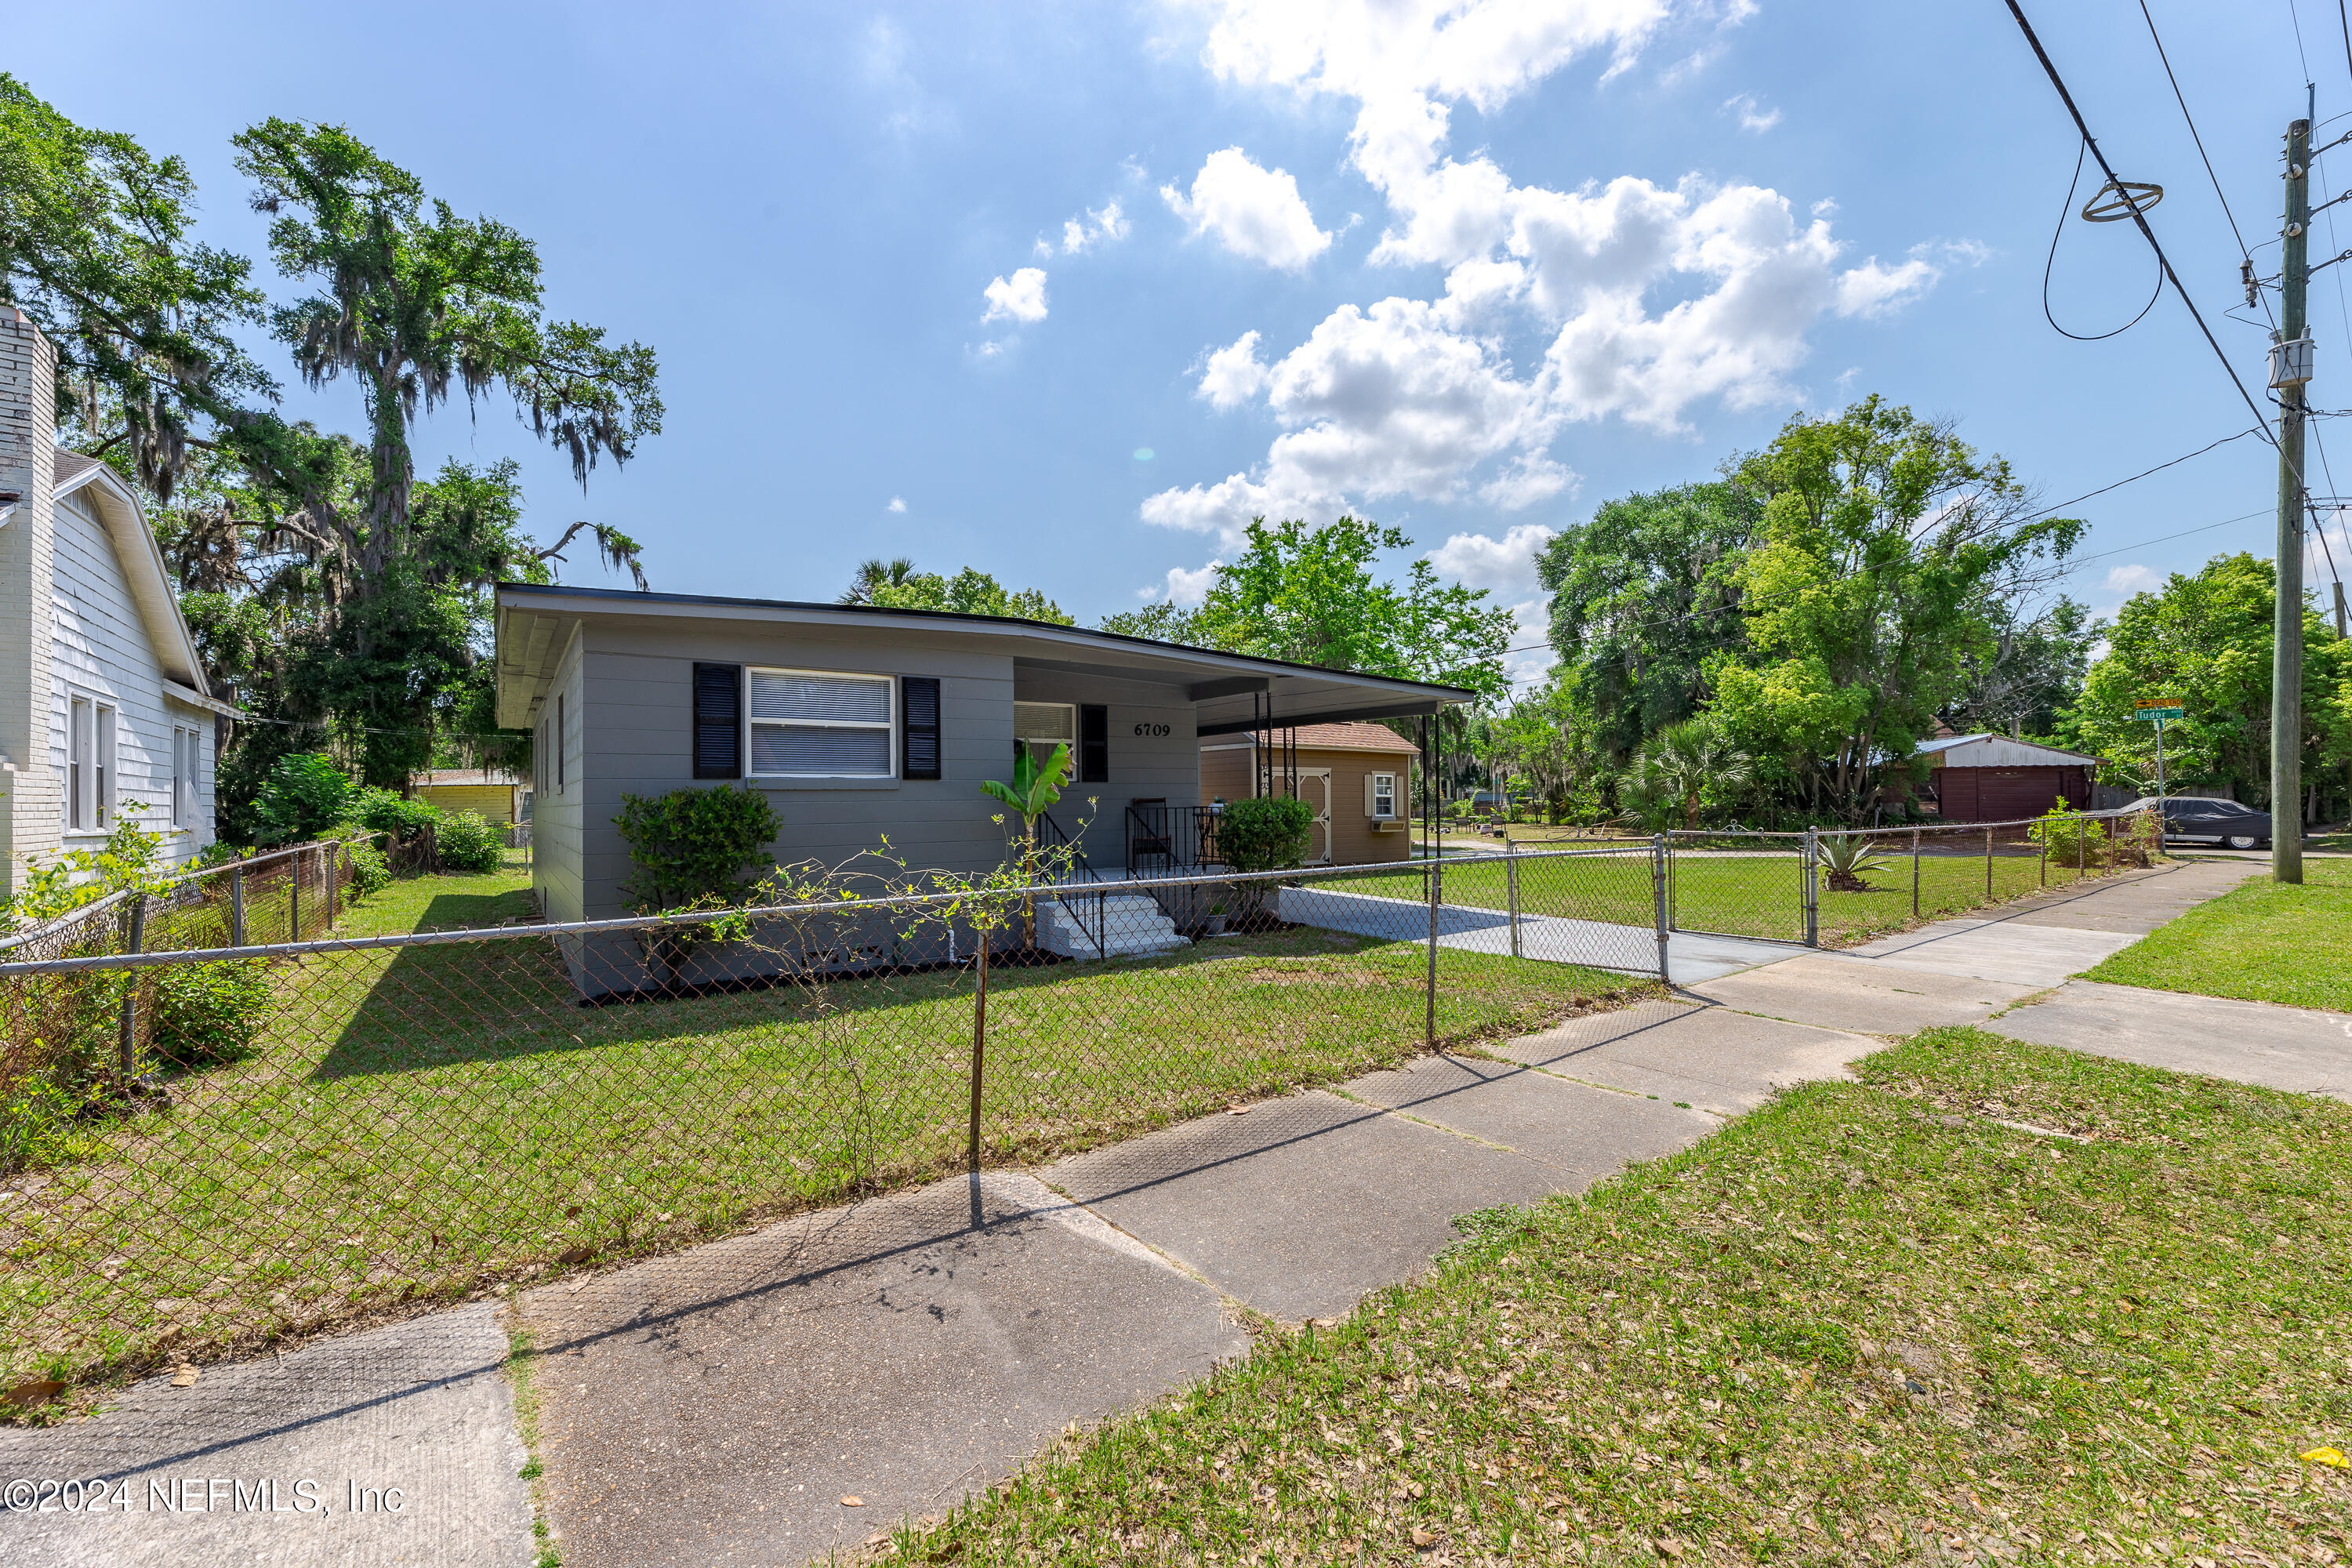 Jacksonville, FL home for sale located at 6709 N Pearl Street, Jacksonville, FL 32208